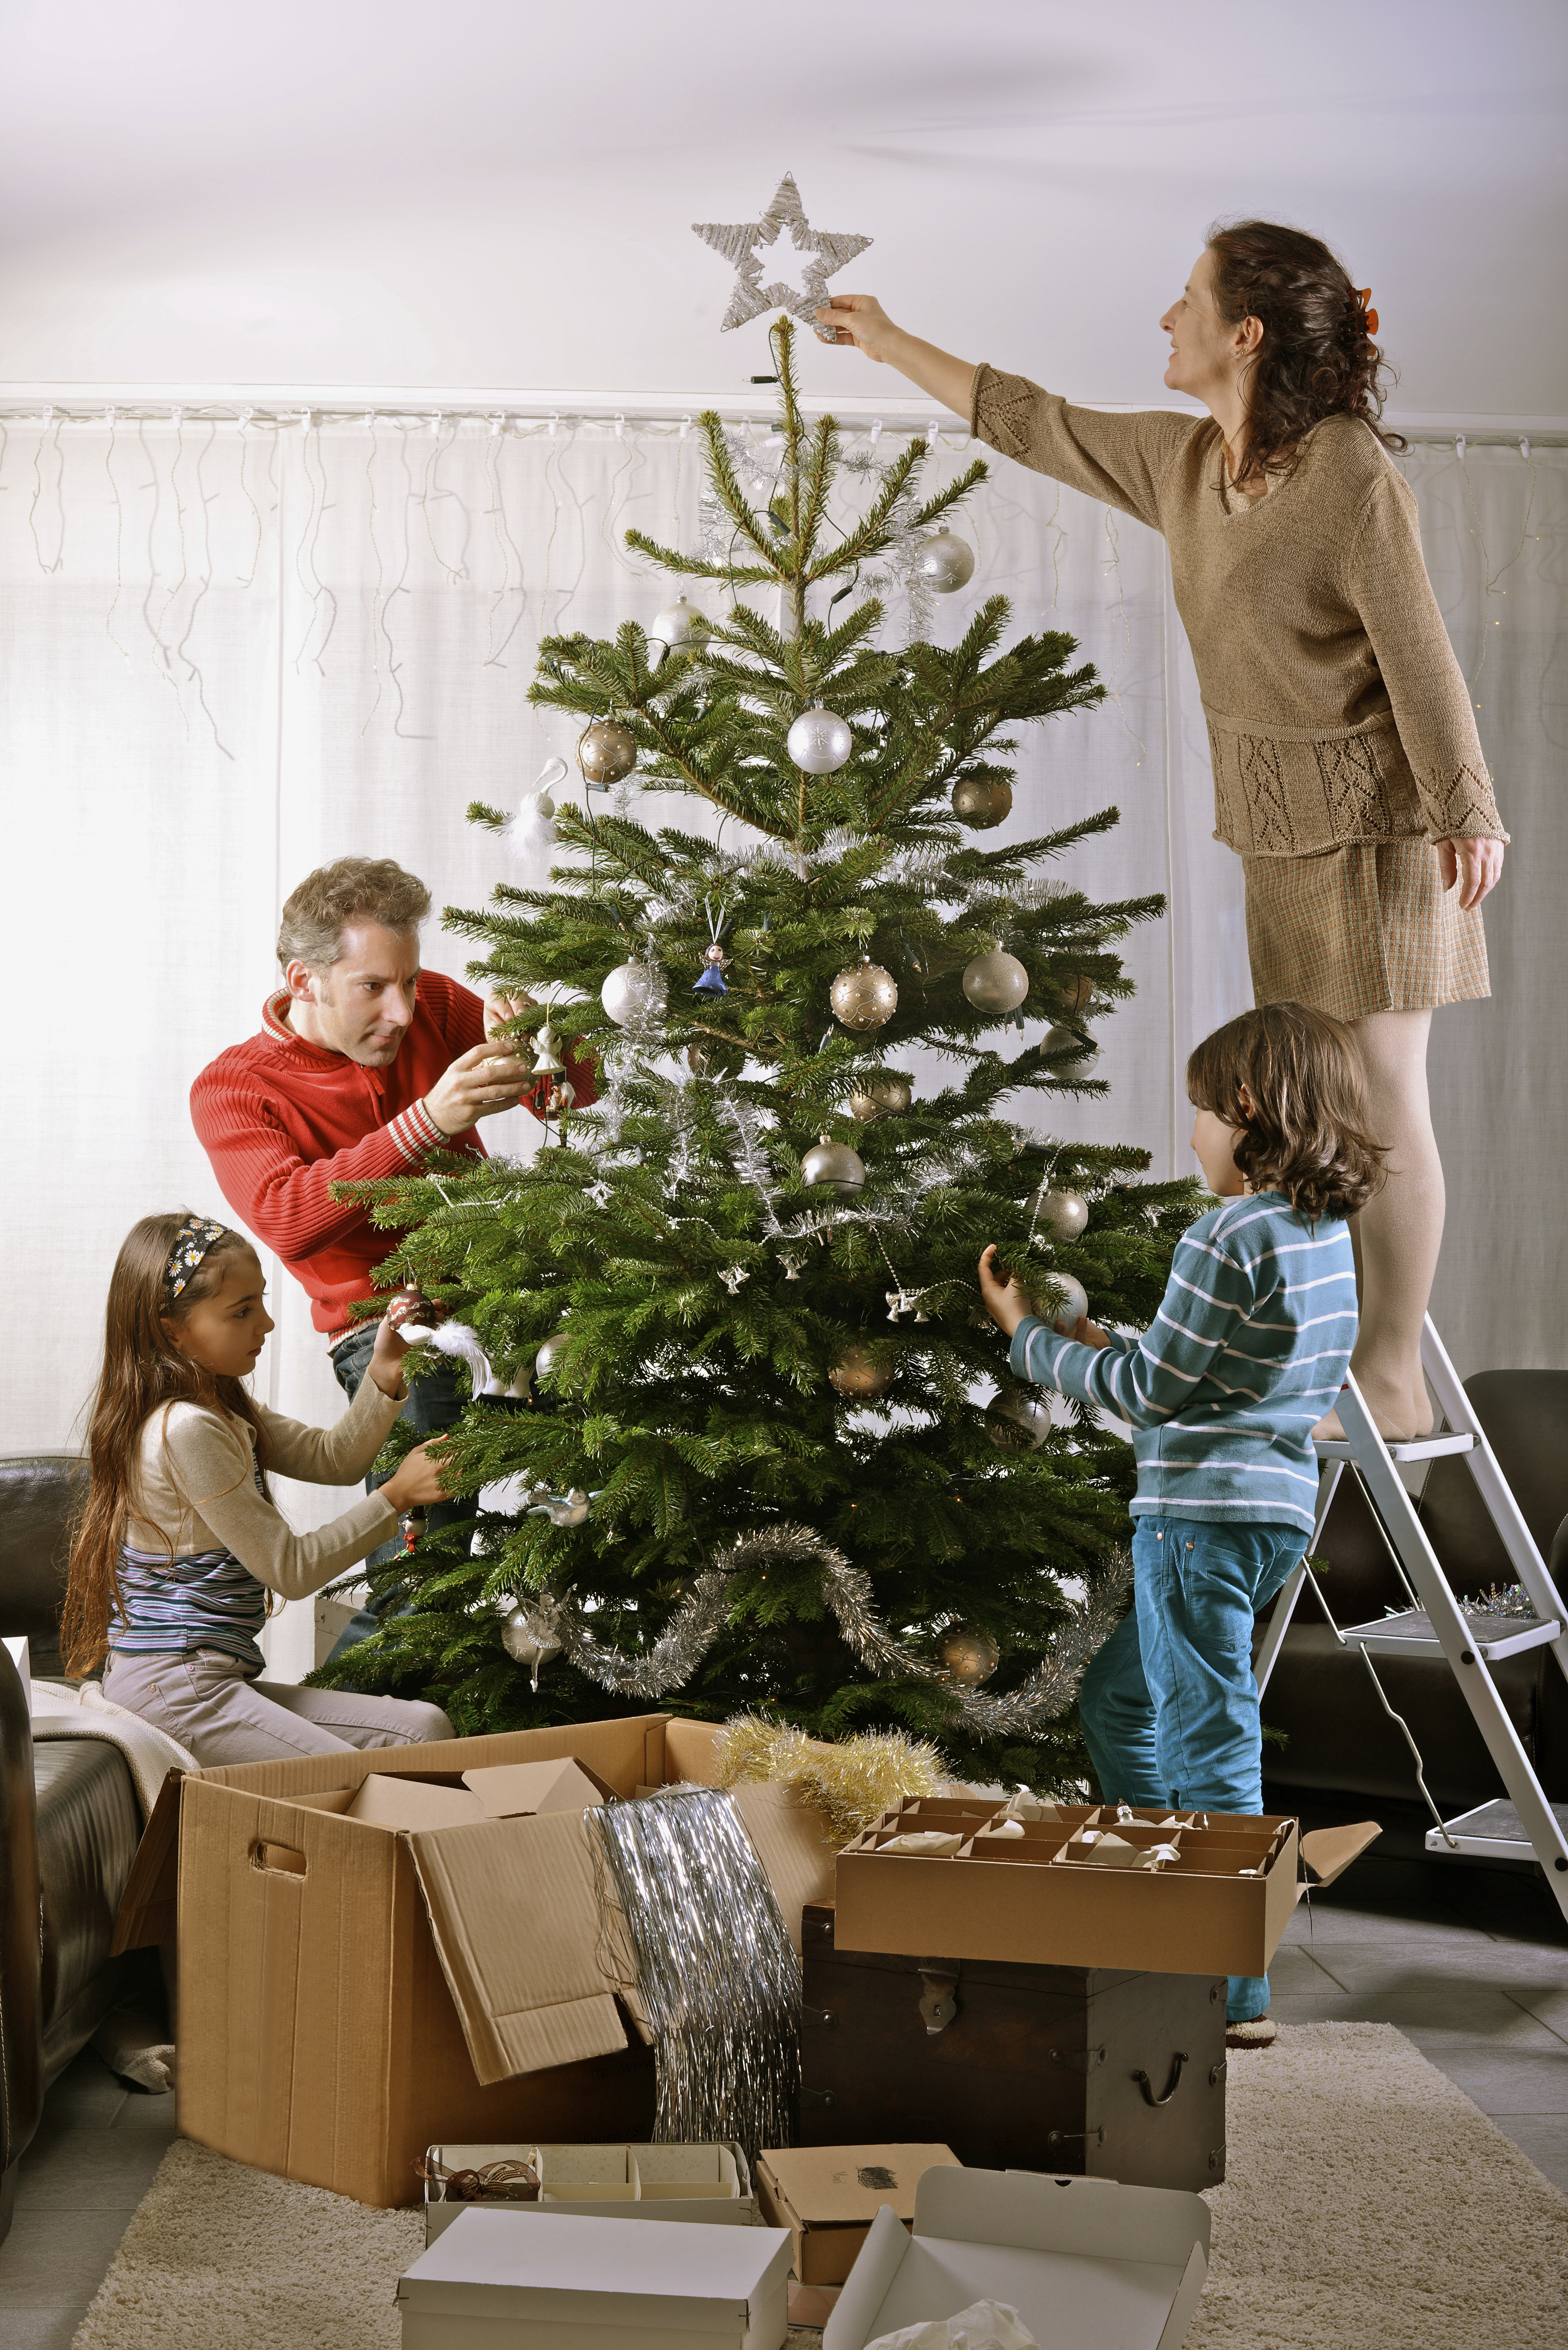  Starting preparations early can help make the festive period less stressful